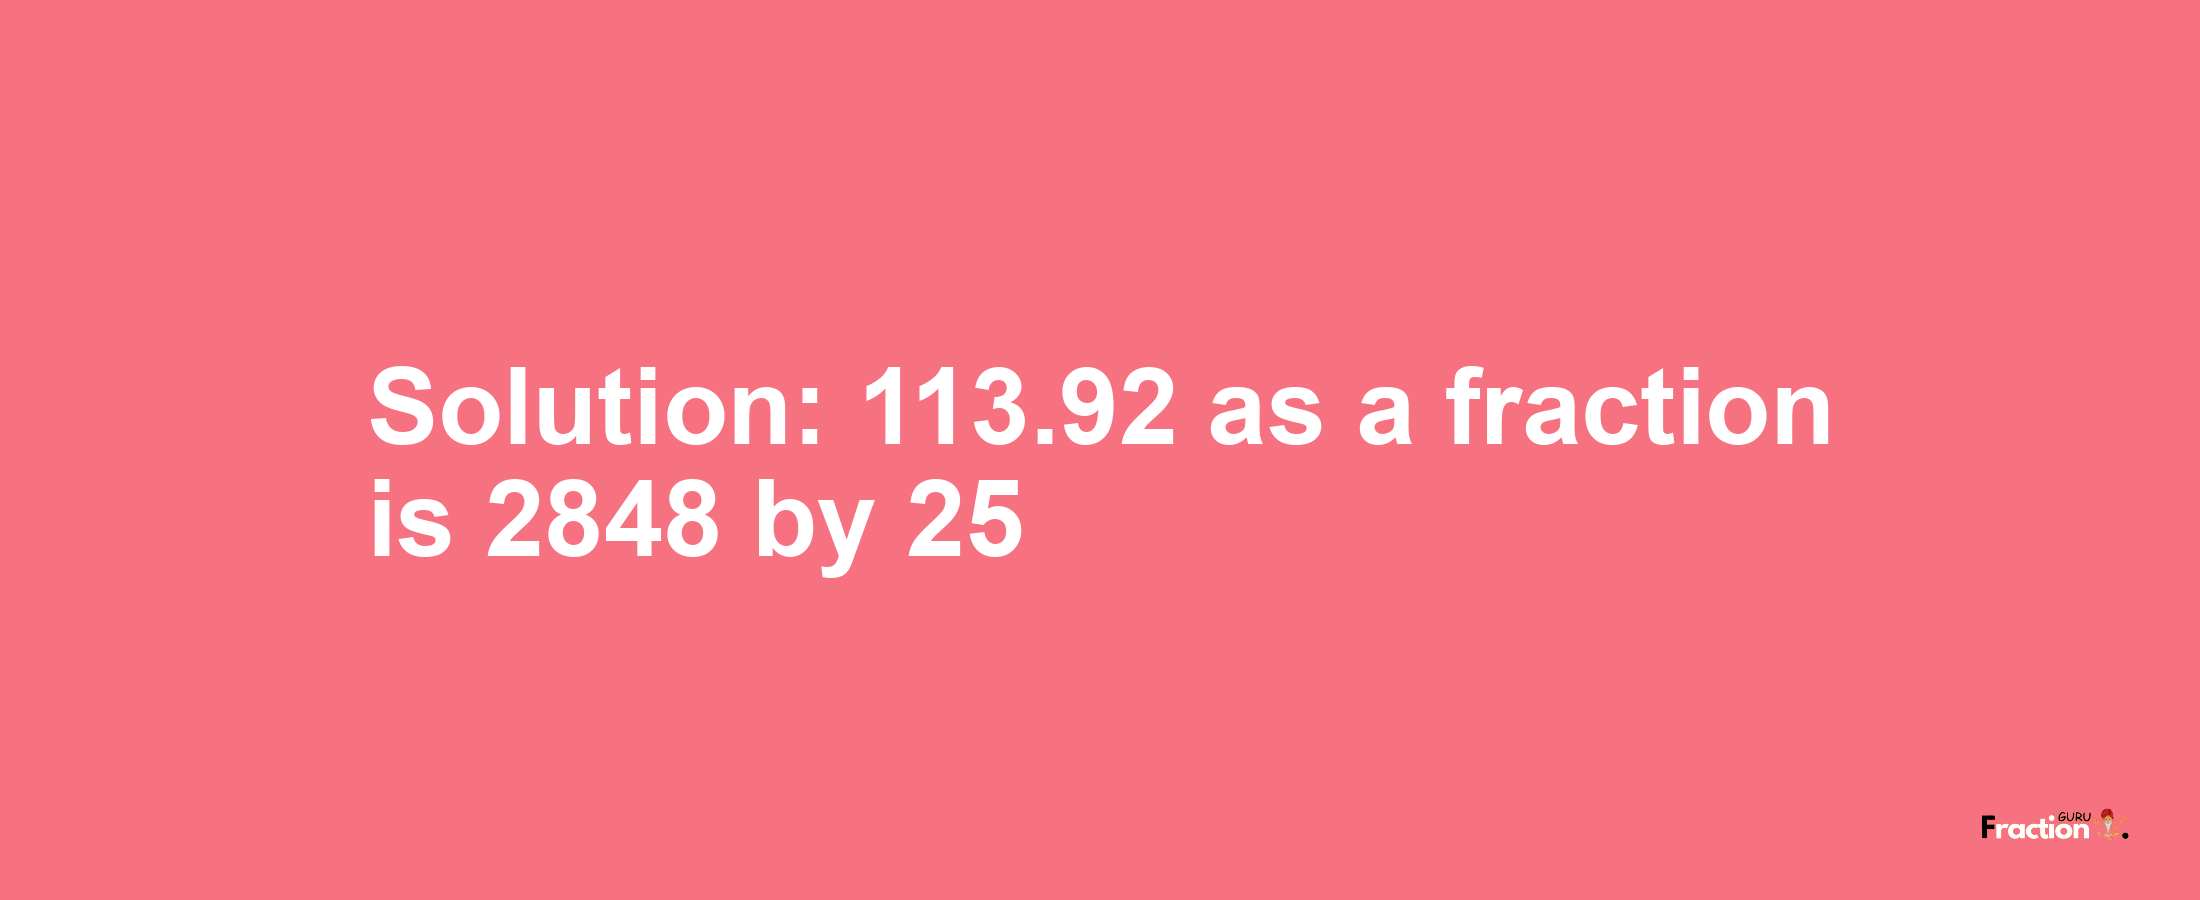 Solution:113.92 as a fraction is 2848/25